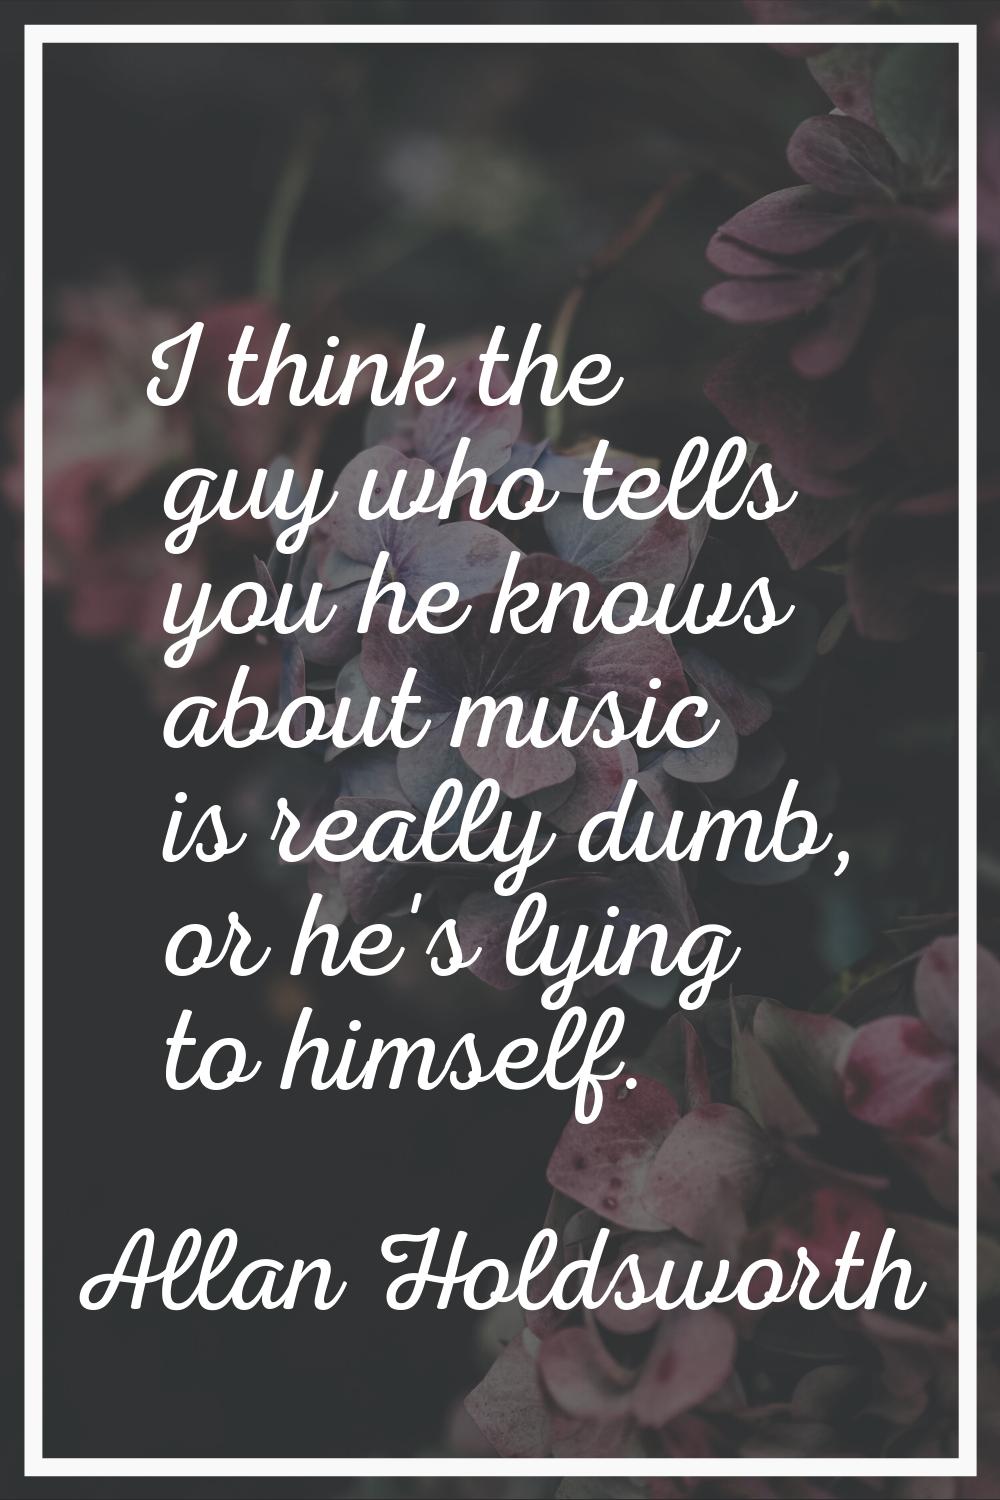 I think the guy who tells you he knows about music is really dumb, or he's lying to himself.